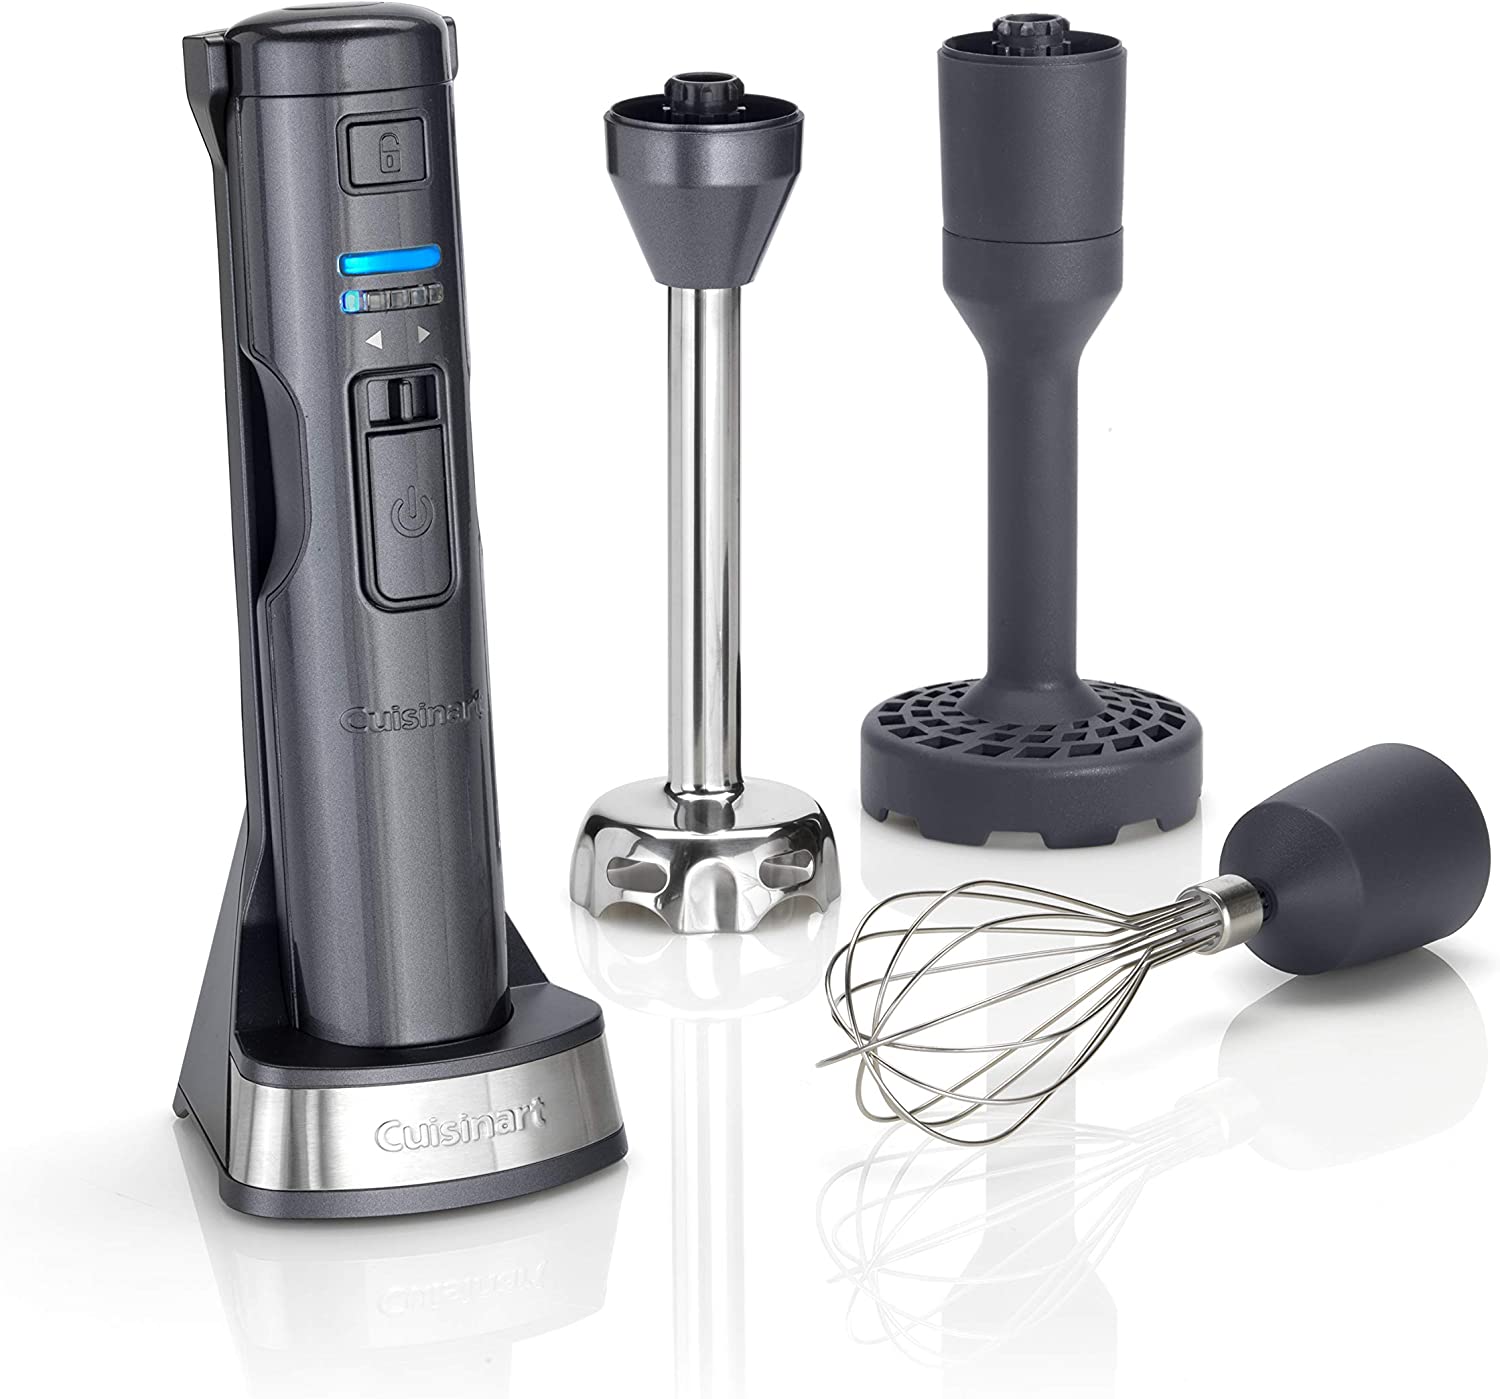 Cuisinart CSB300BE 3-in-1 Hand Blender with Whisk Attachment, Purée Stick and Masher Attachment, Stainless Steel, Cordless, Blue